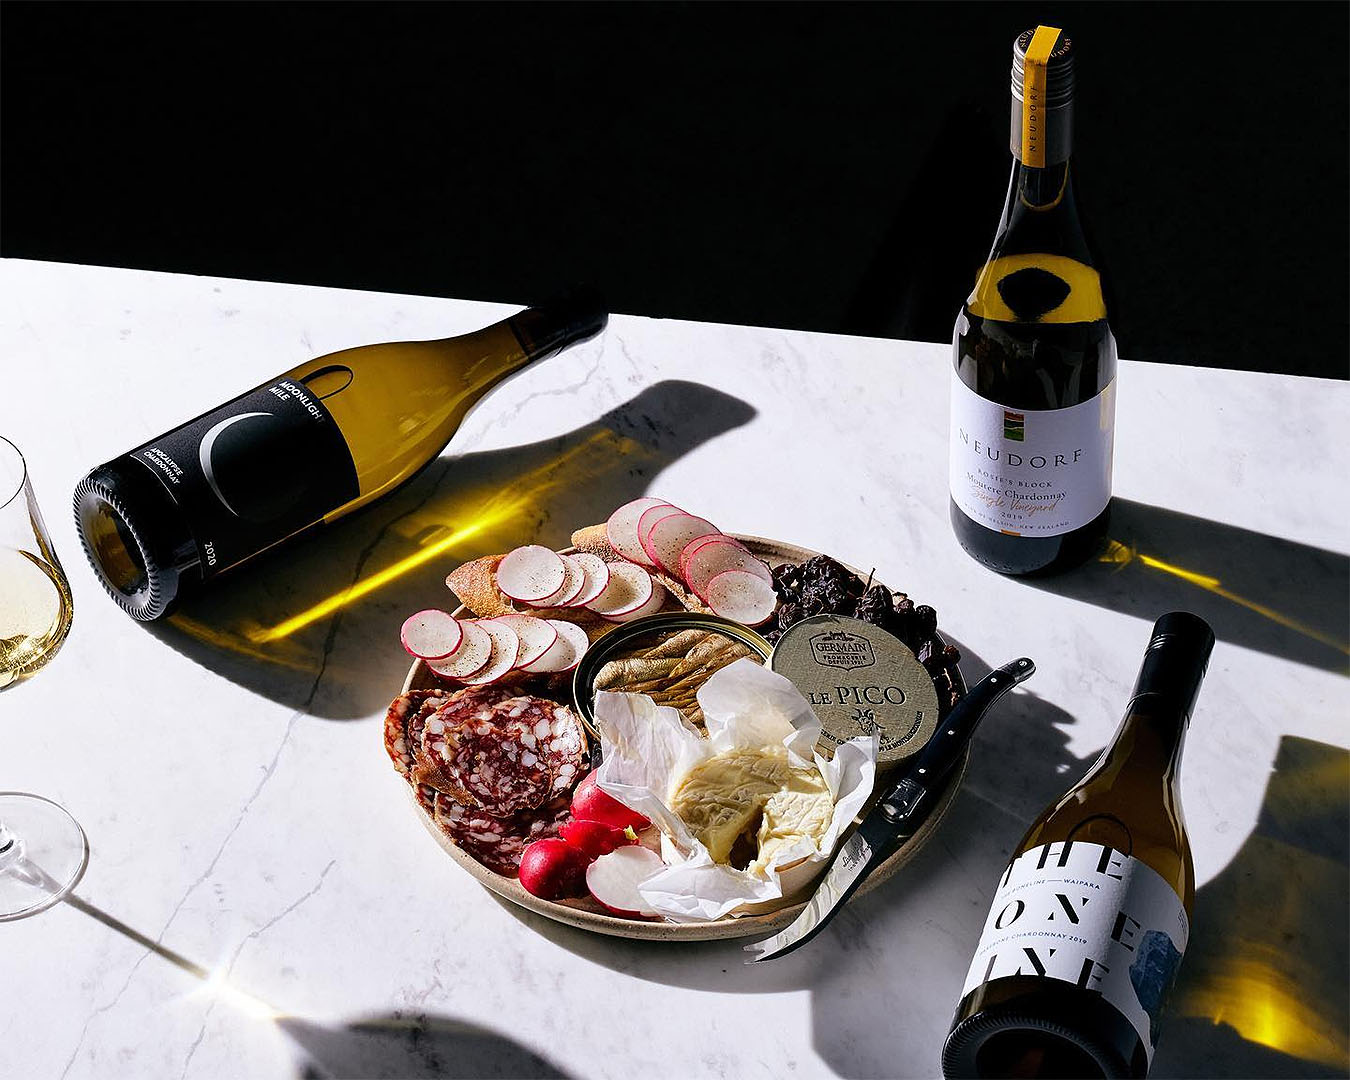 Three chardonnays lie artfully on a table around a platter of food. One of the best alcohol for delivery companies in NZ.